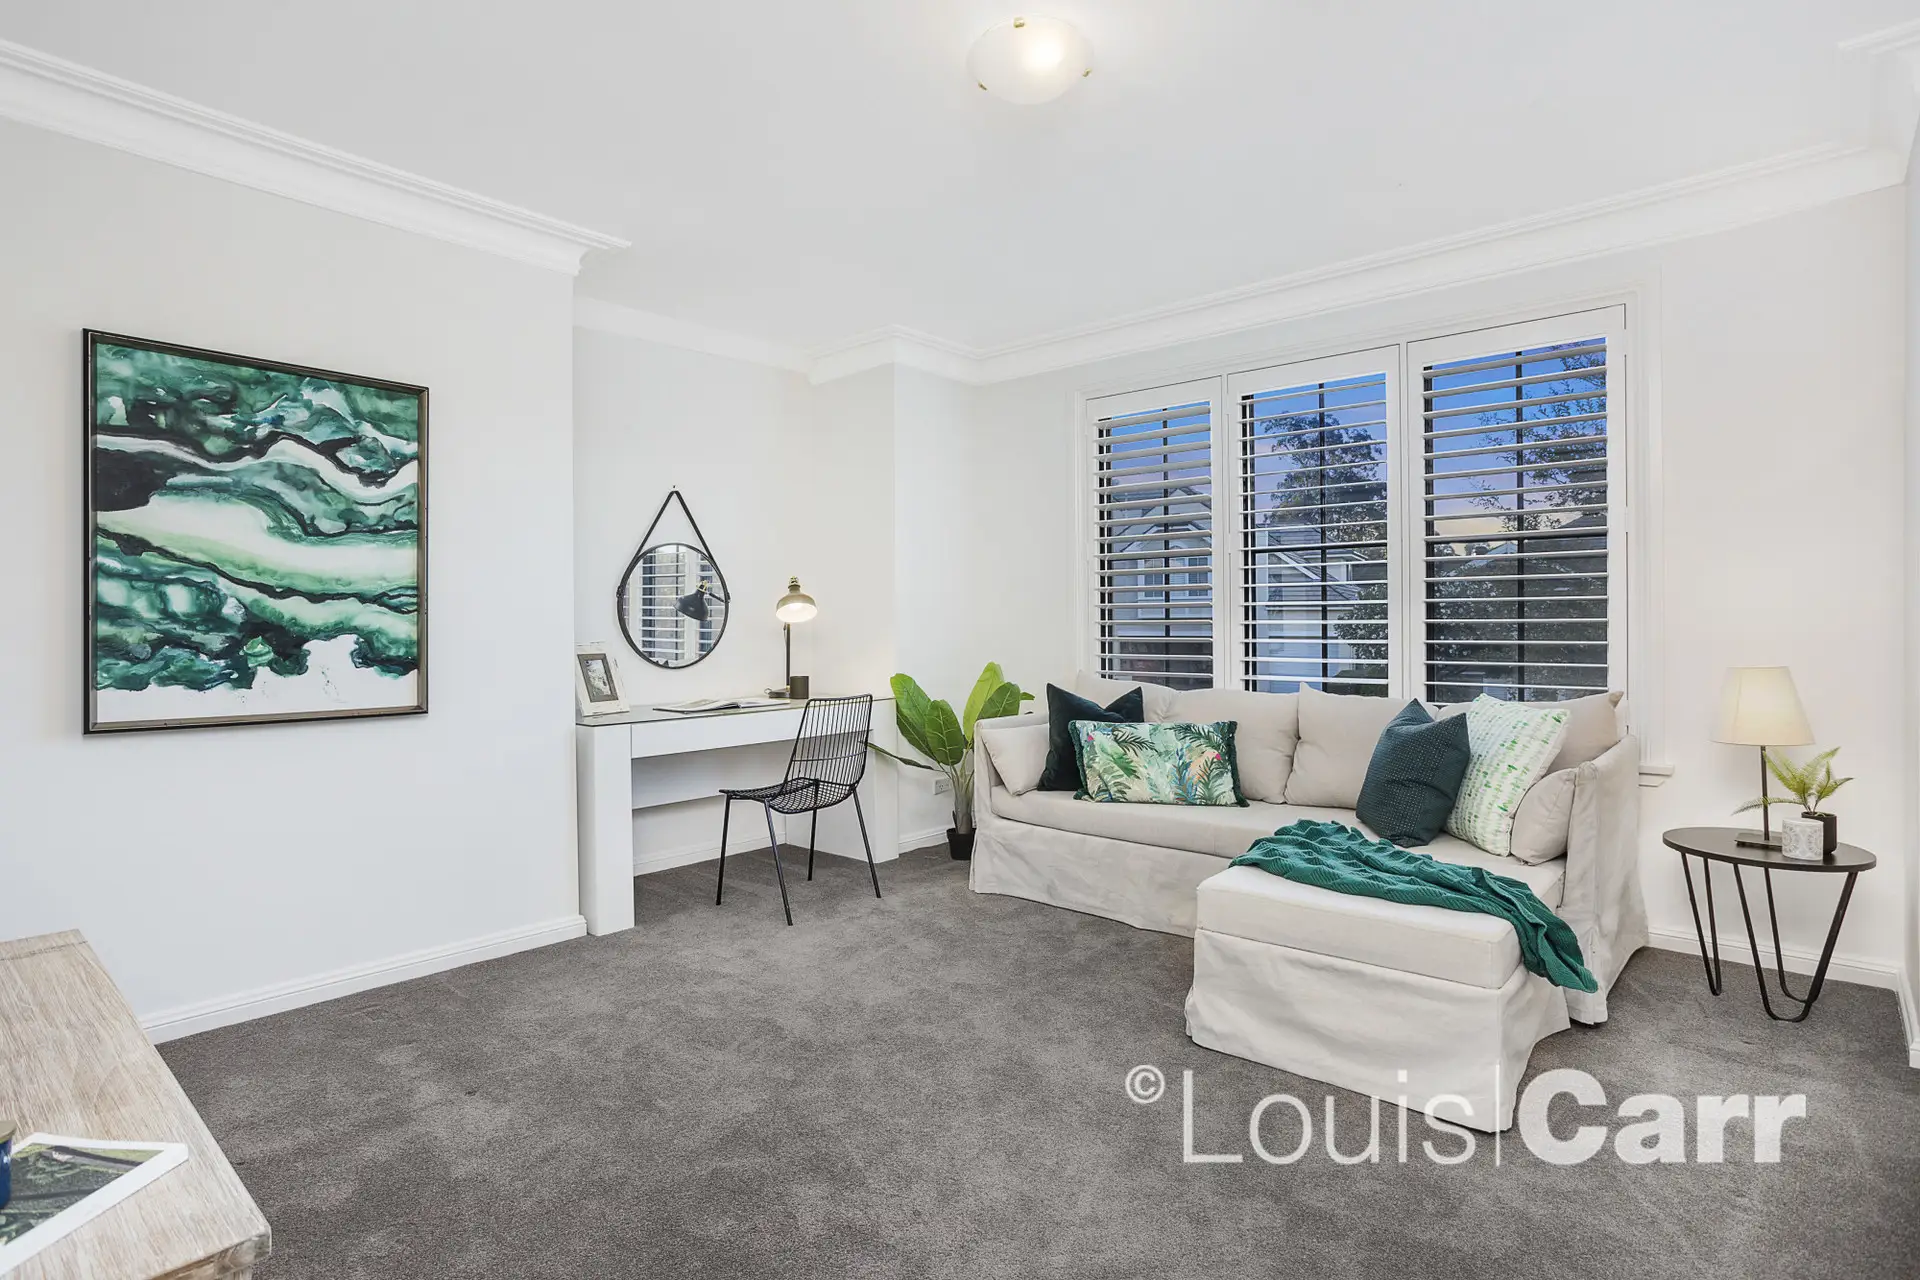 Photo #6: 17 Kambah Place, West Pennant Hills - Sold by Louis Carr Real Estate